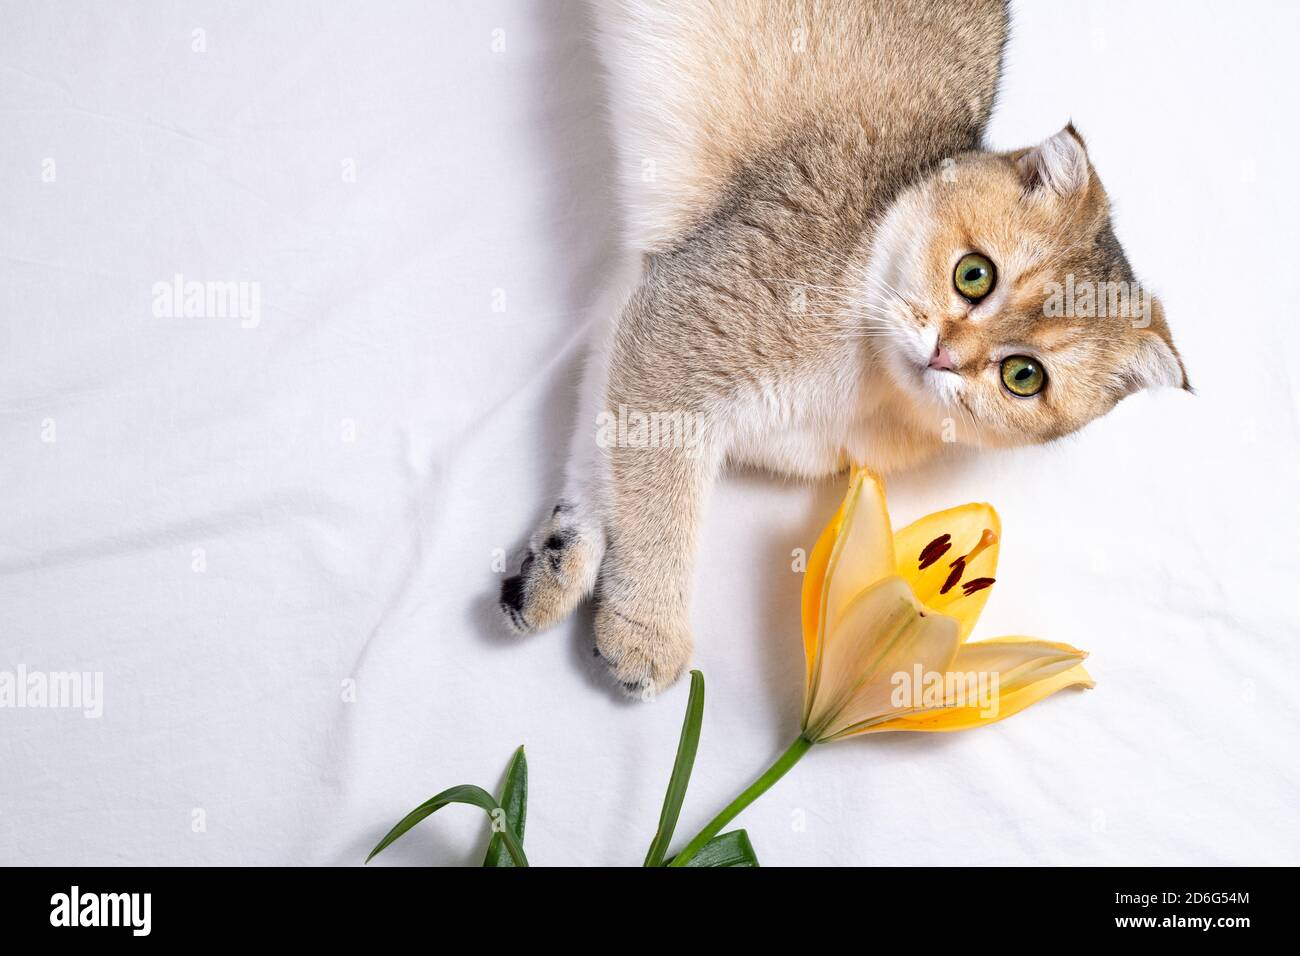 Cat and flower. Funny kitten and lily flower on white background. Cute cat and beautiful flower. Happy birthday, holidays, cozy home cat concept Stock Photo